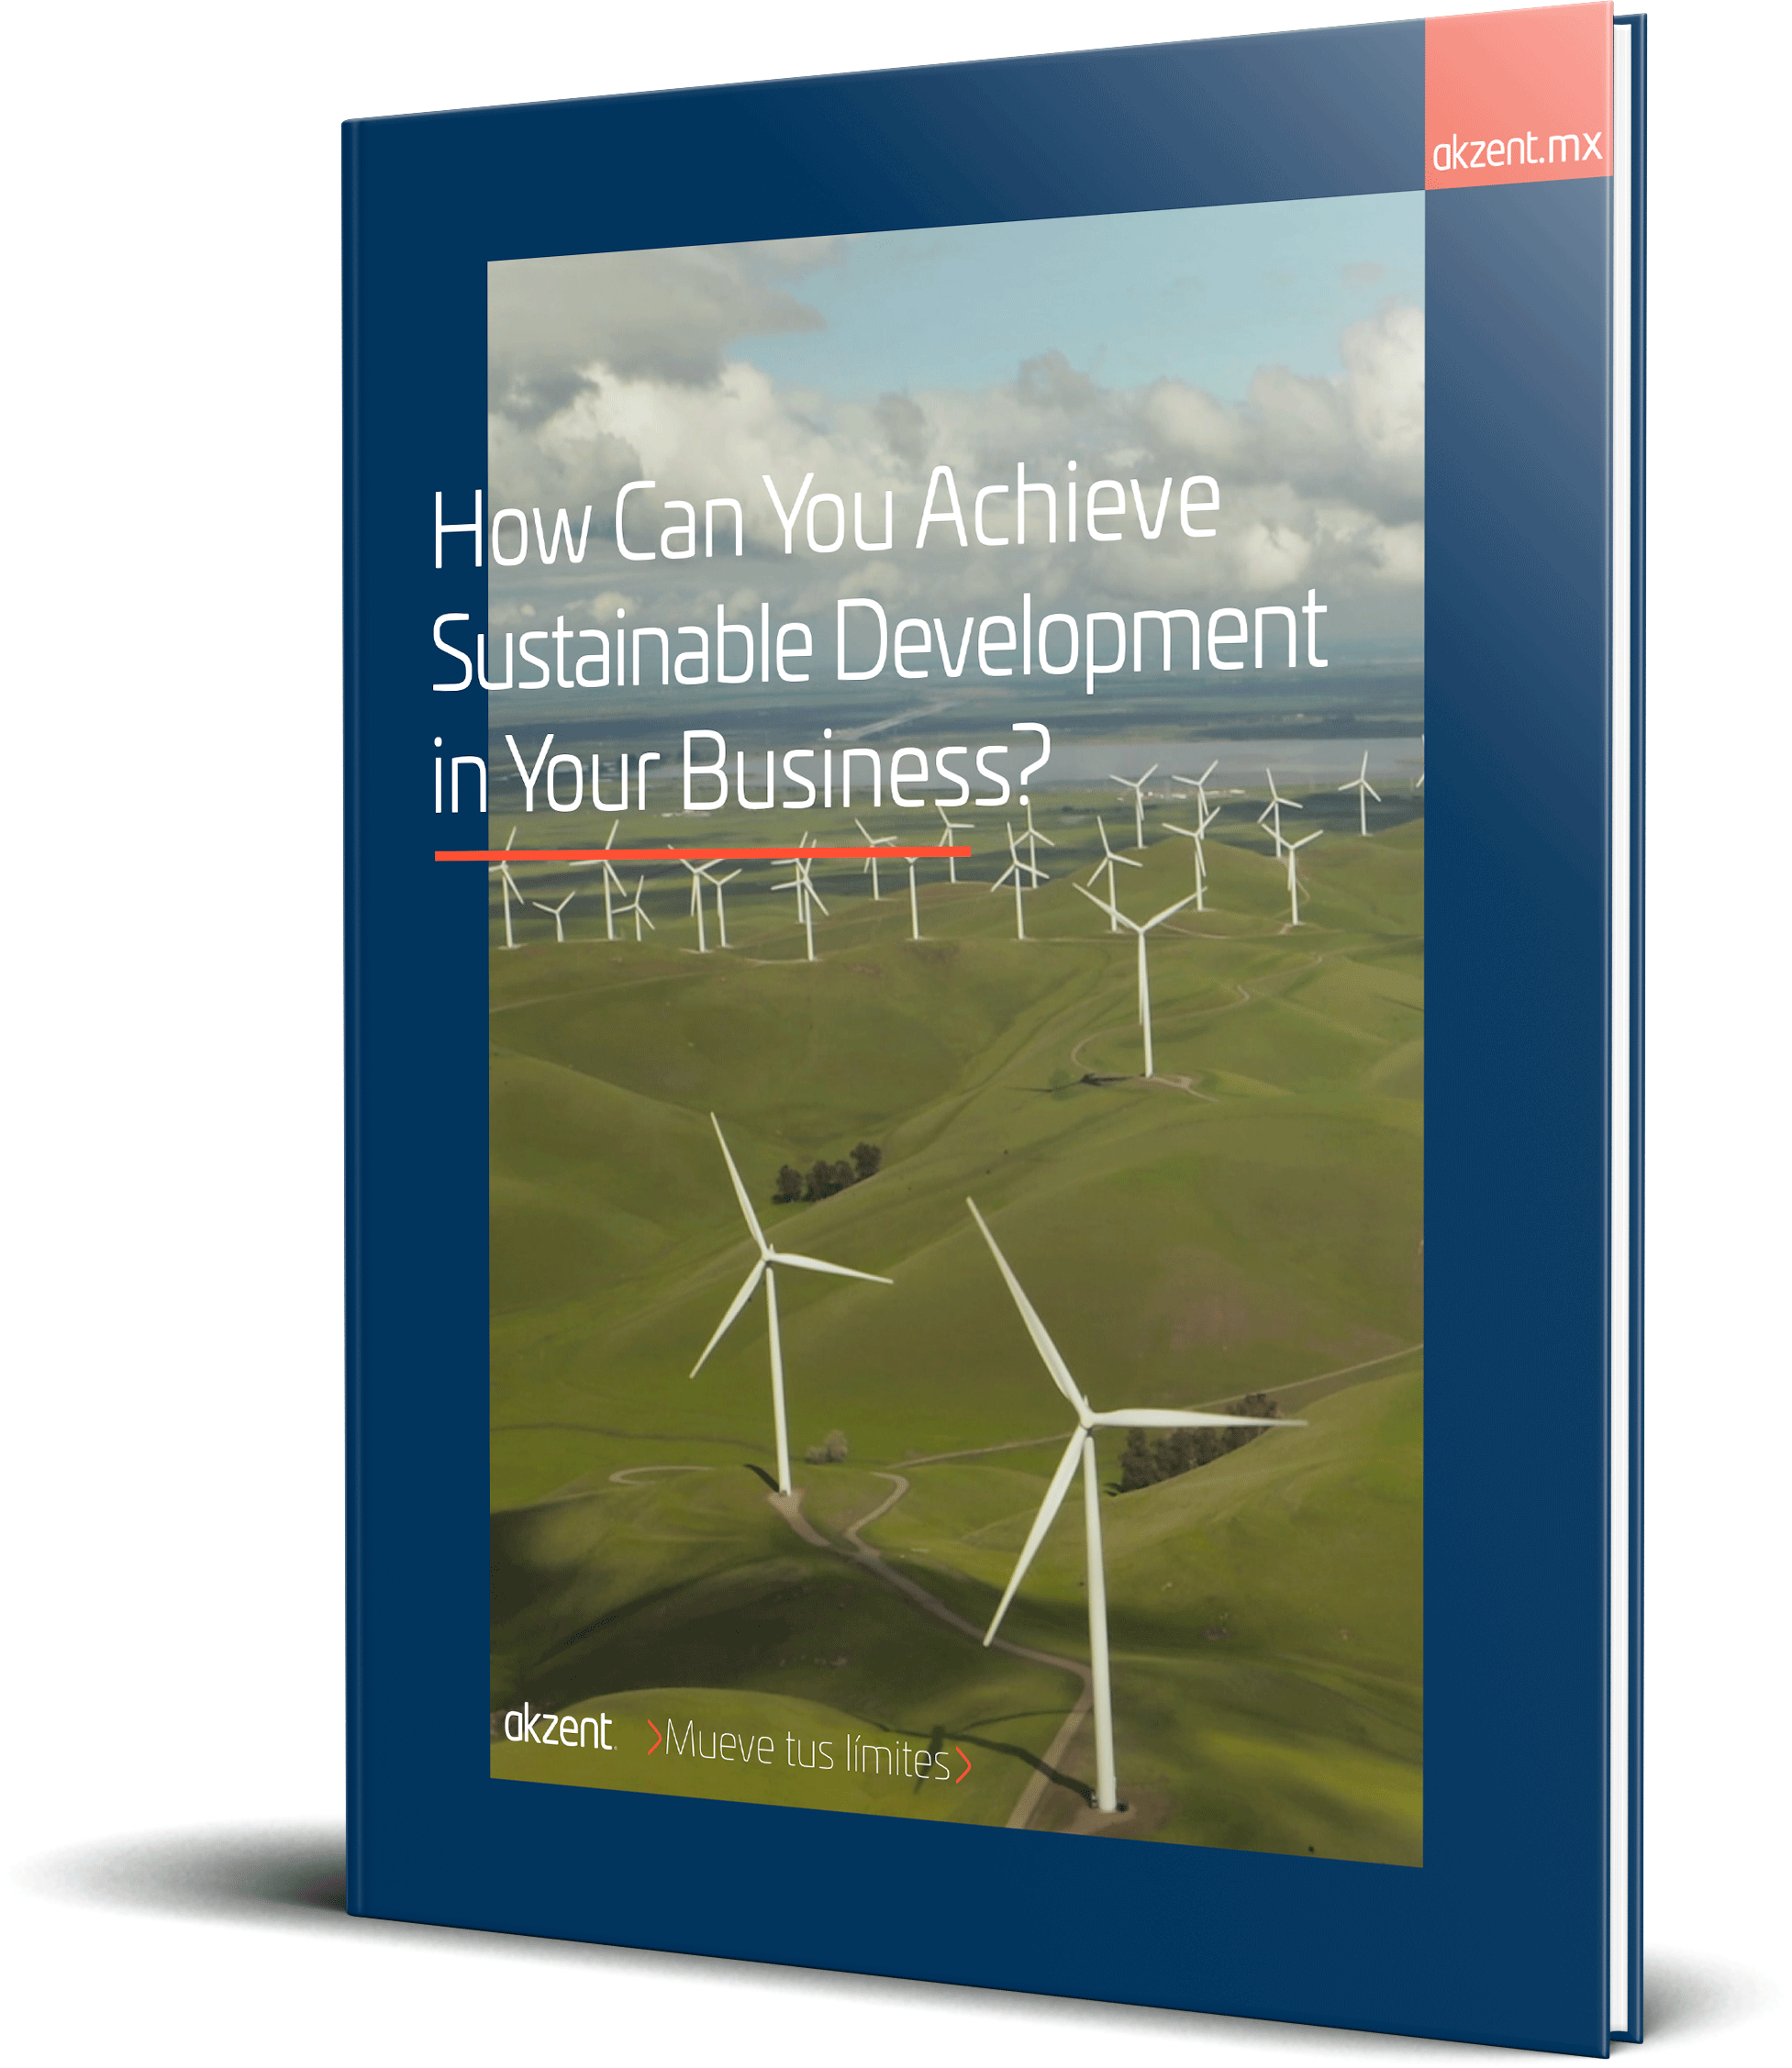 How-Can-You-Achieve-Sustainable-Development-in-Your-Business-_Mockup-eBook_Akzent